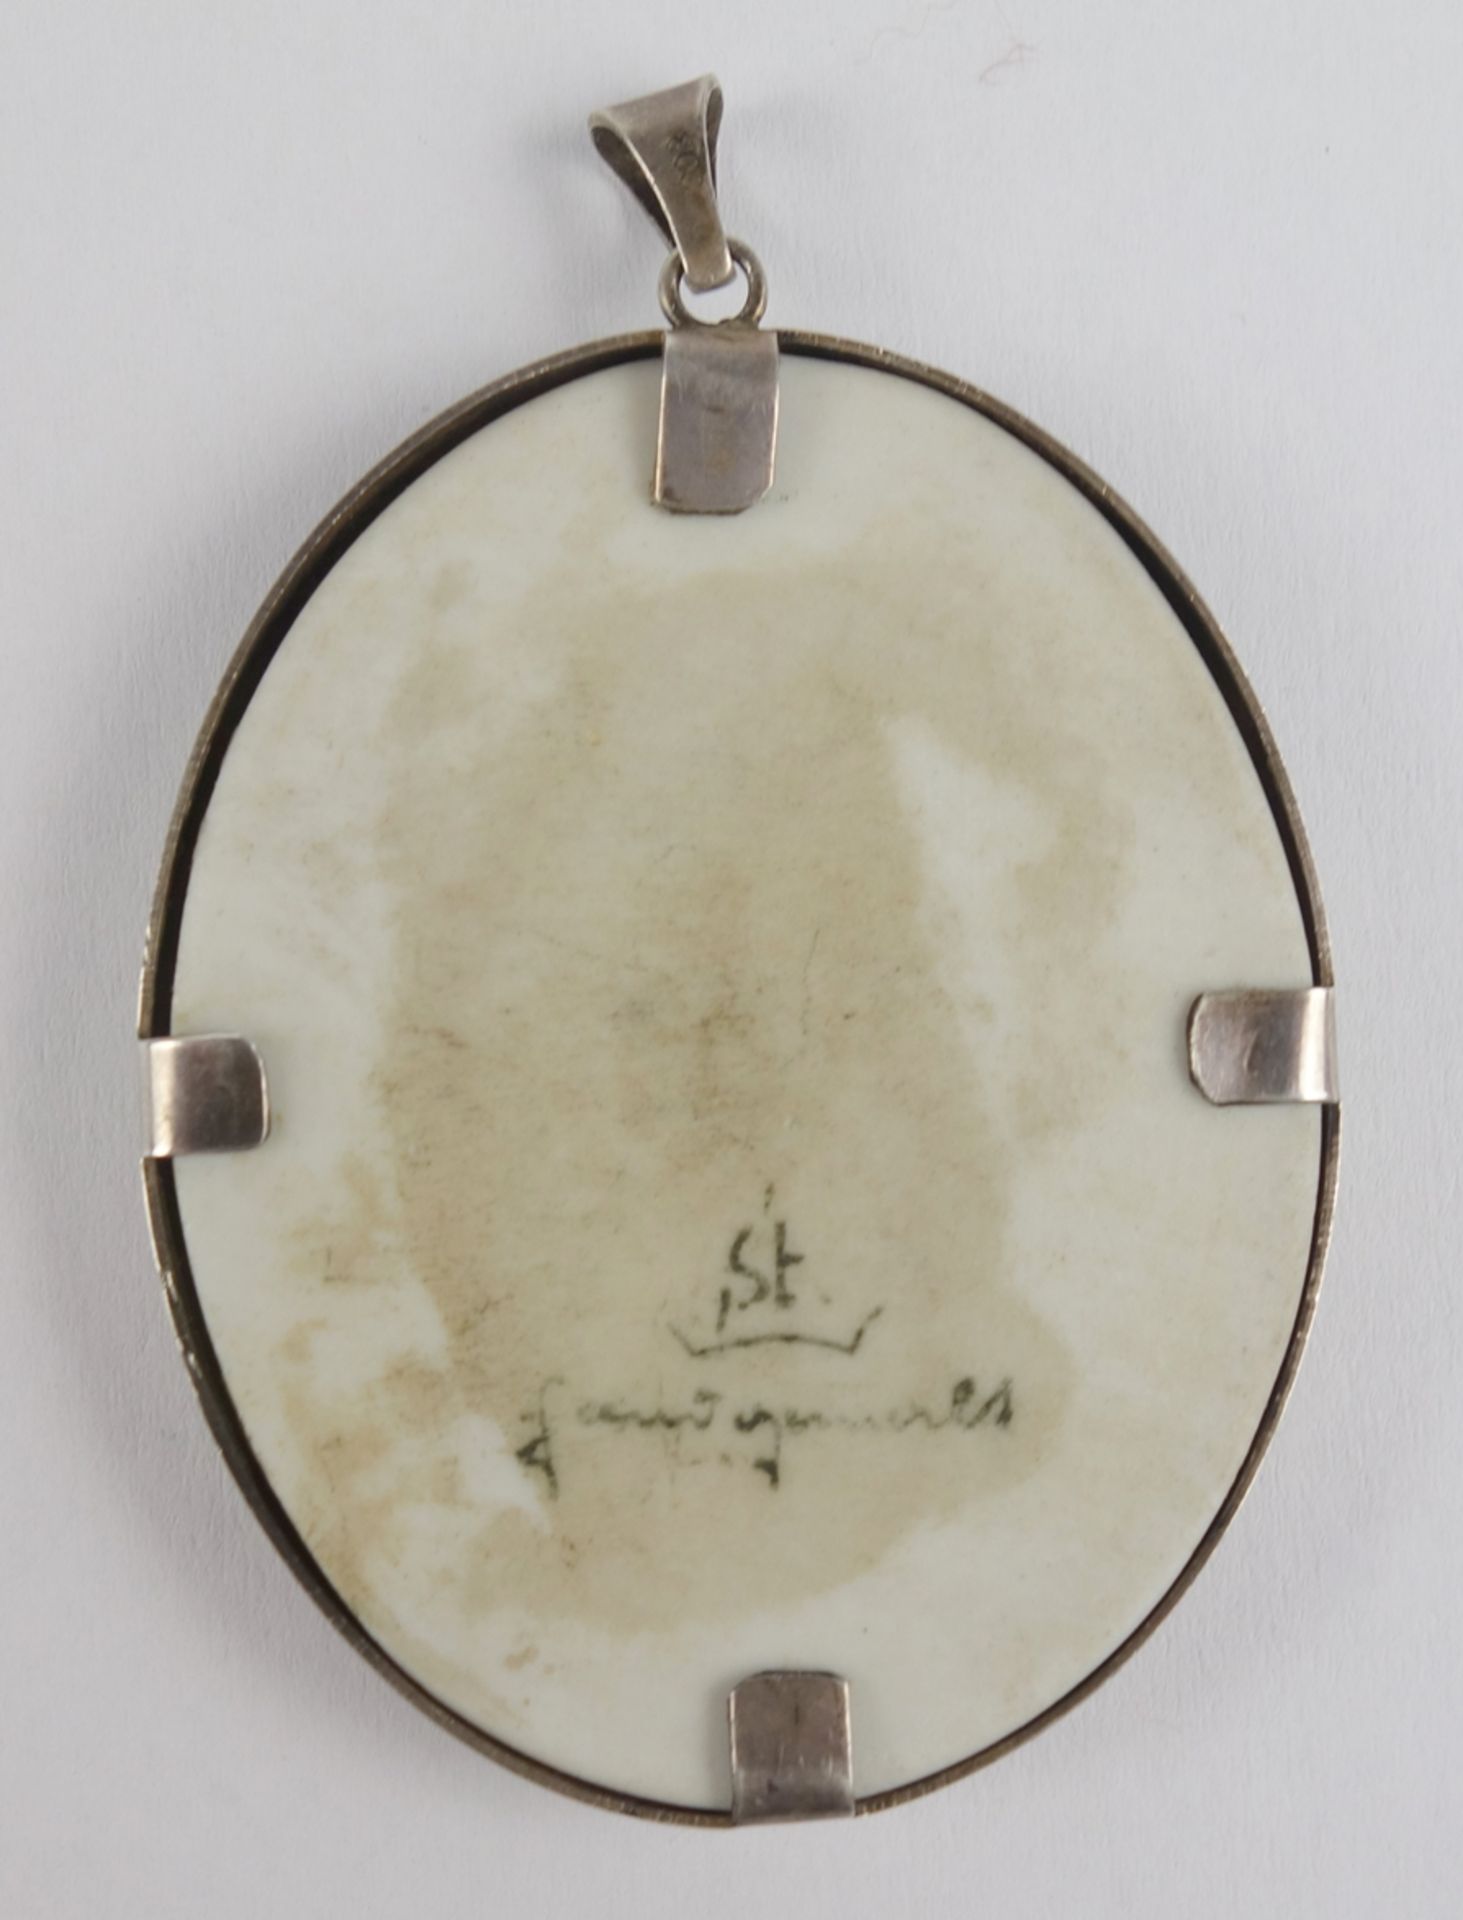 Porcelain pendant with hand painting, 800 silver setting - Image 2 of 2